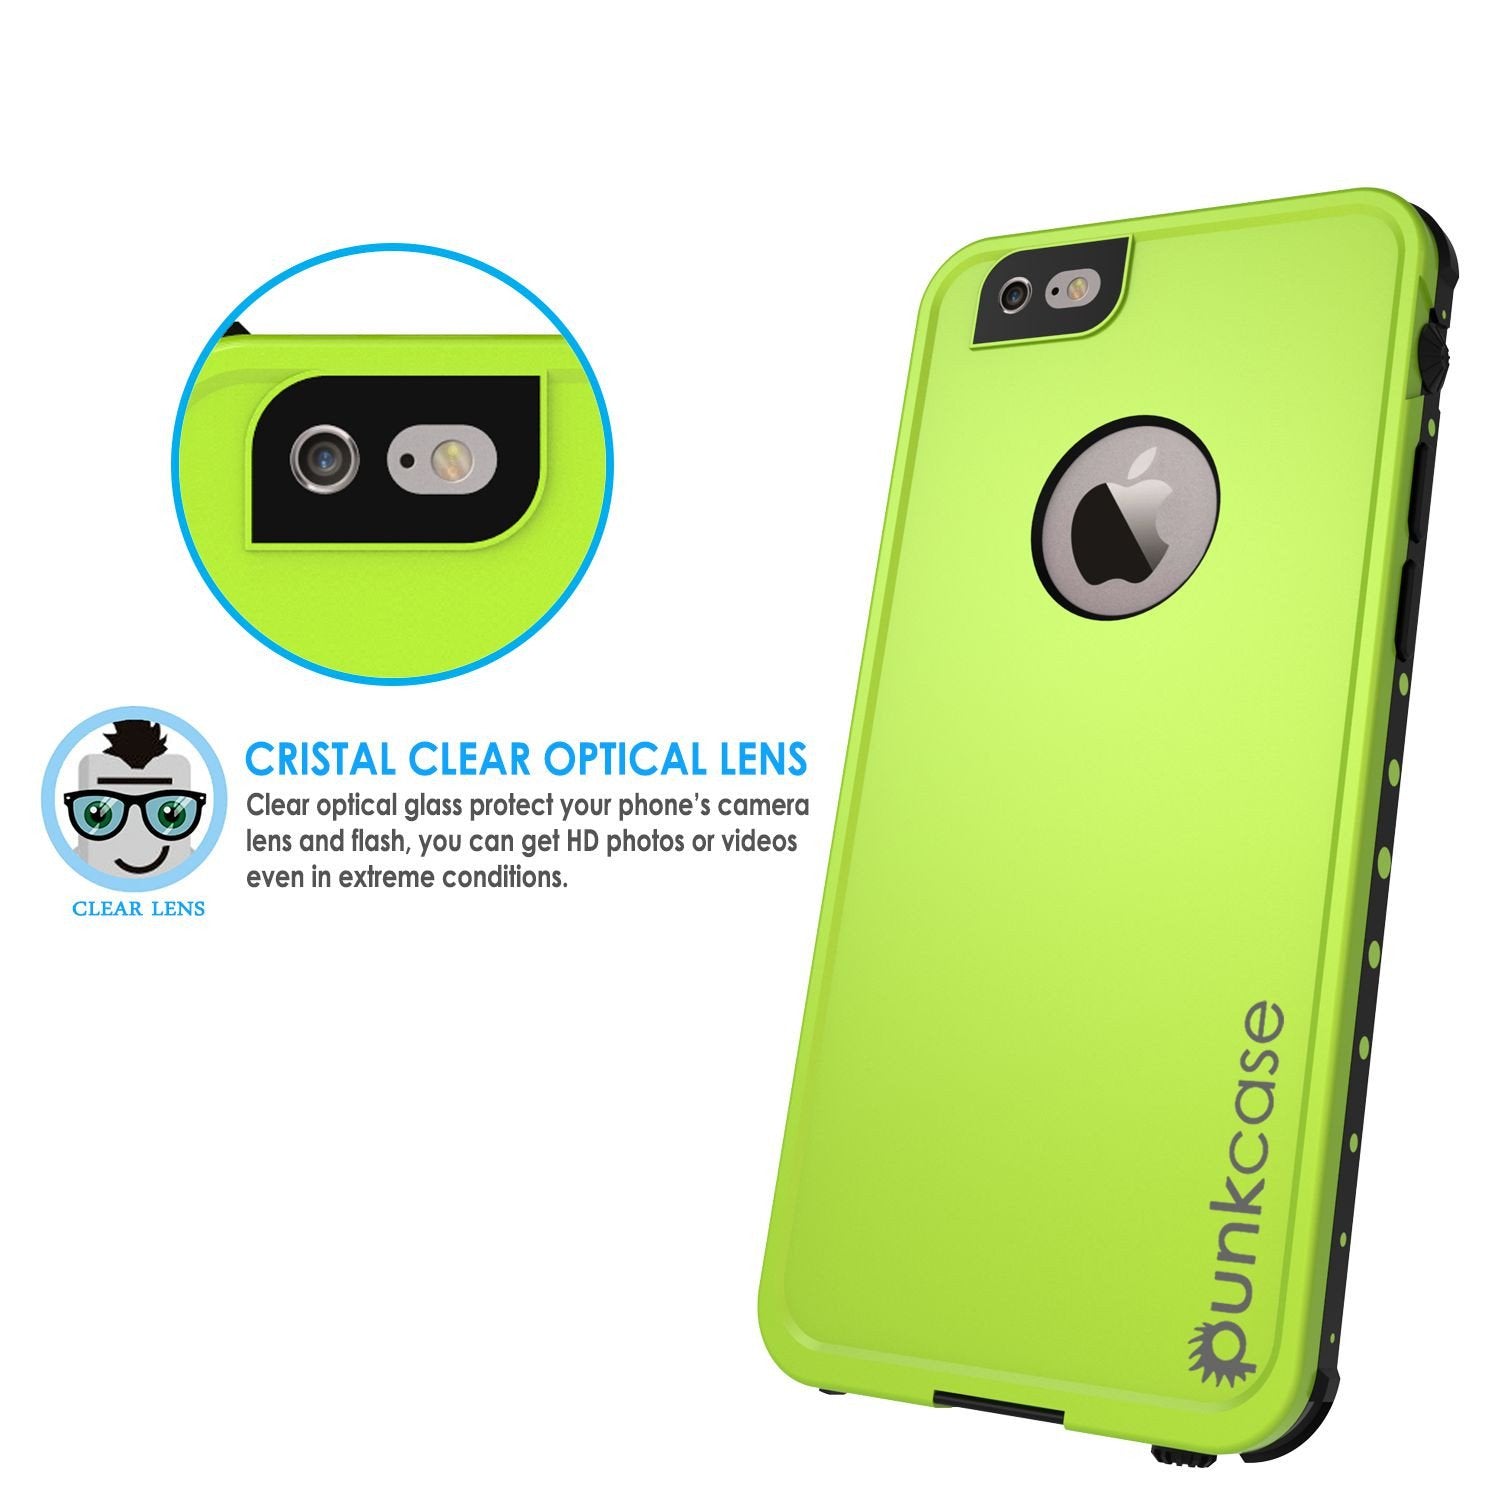 iPhone 6S+/6+ Plus Waterproof Case, PUNKcase StudStar Light Green w/ Attached Screen Protector